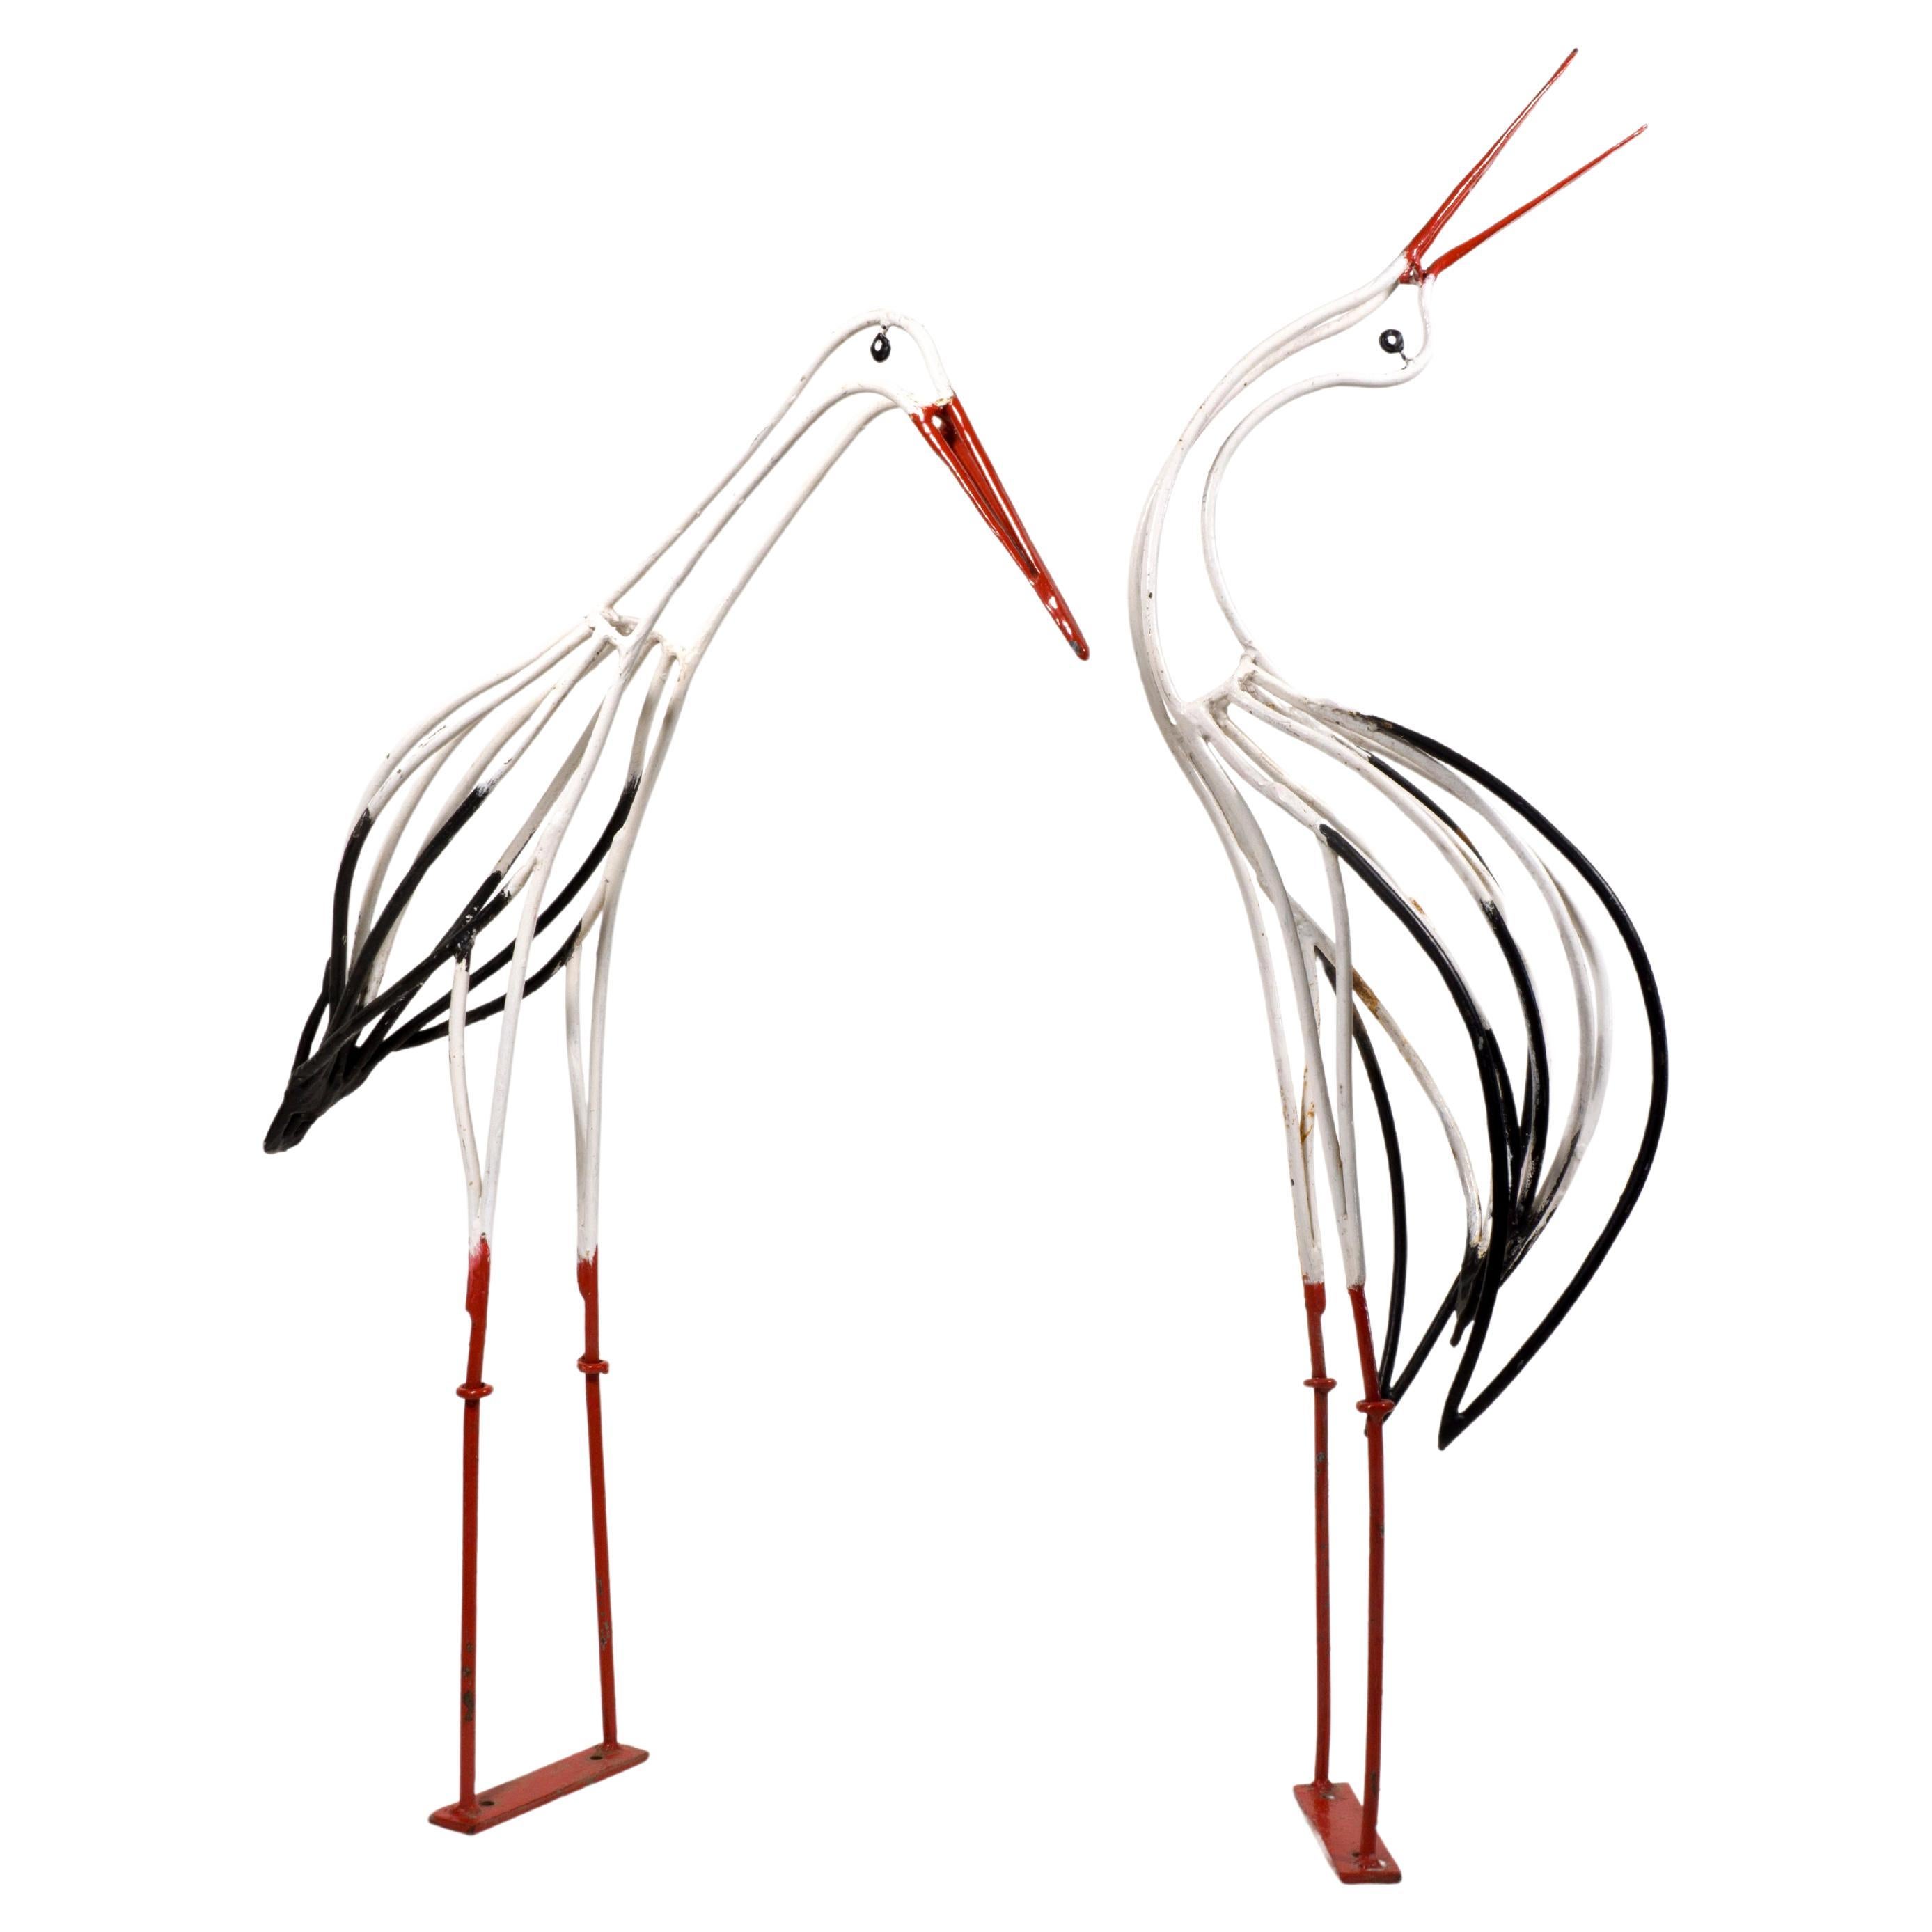 Very decorative and utterly attractive life-size pair of laquered wrought iron stork sculptures from the 1950s.
Each Stork is well finished and both of them have a lovely naturally weathered and aged patina, so the sculptures are in good vintage